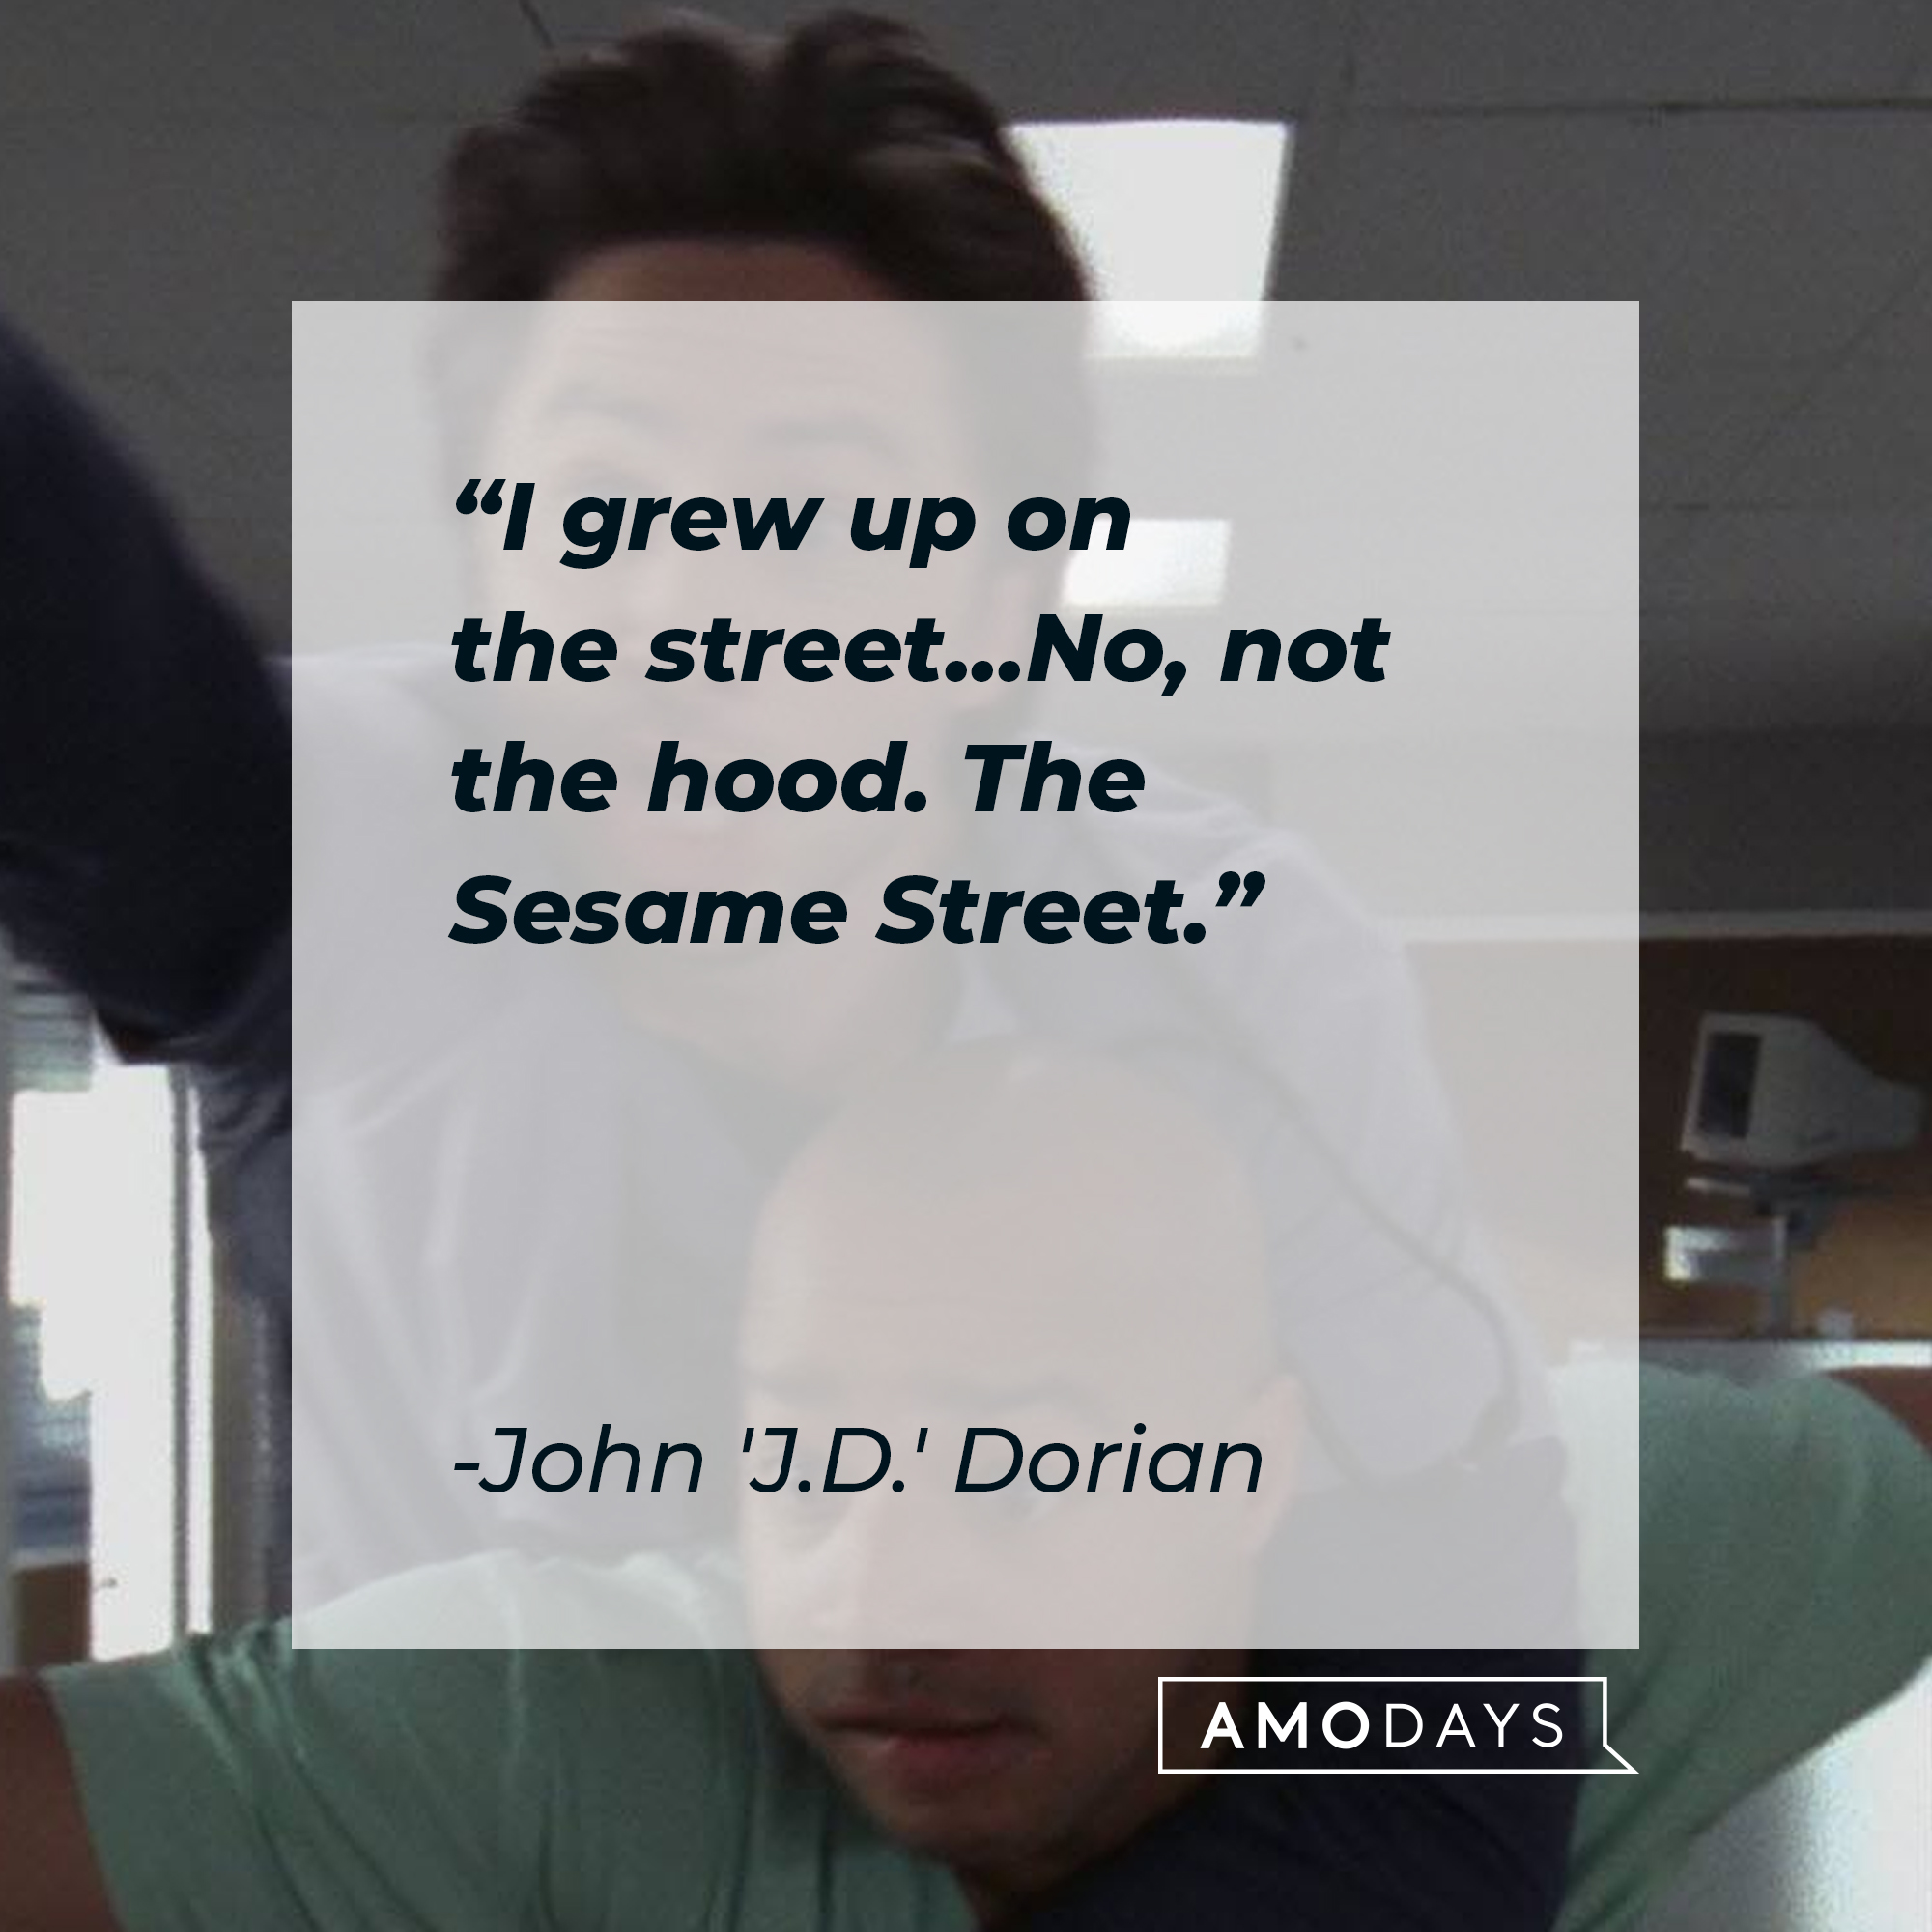 Christoper Turk and John 'J.D.' Dorian with Dorian’s quote: “I grew up on the street... No, not the hood. The Sesame Street.” | Source: Facebook.com/scrubs